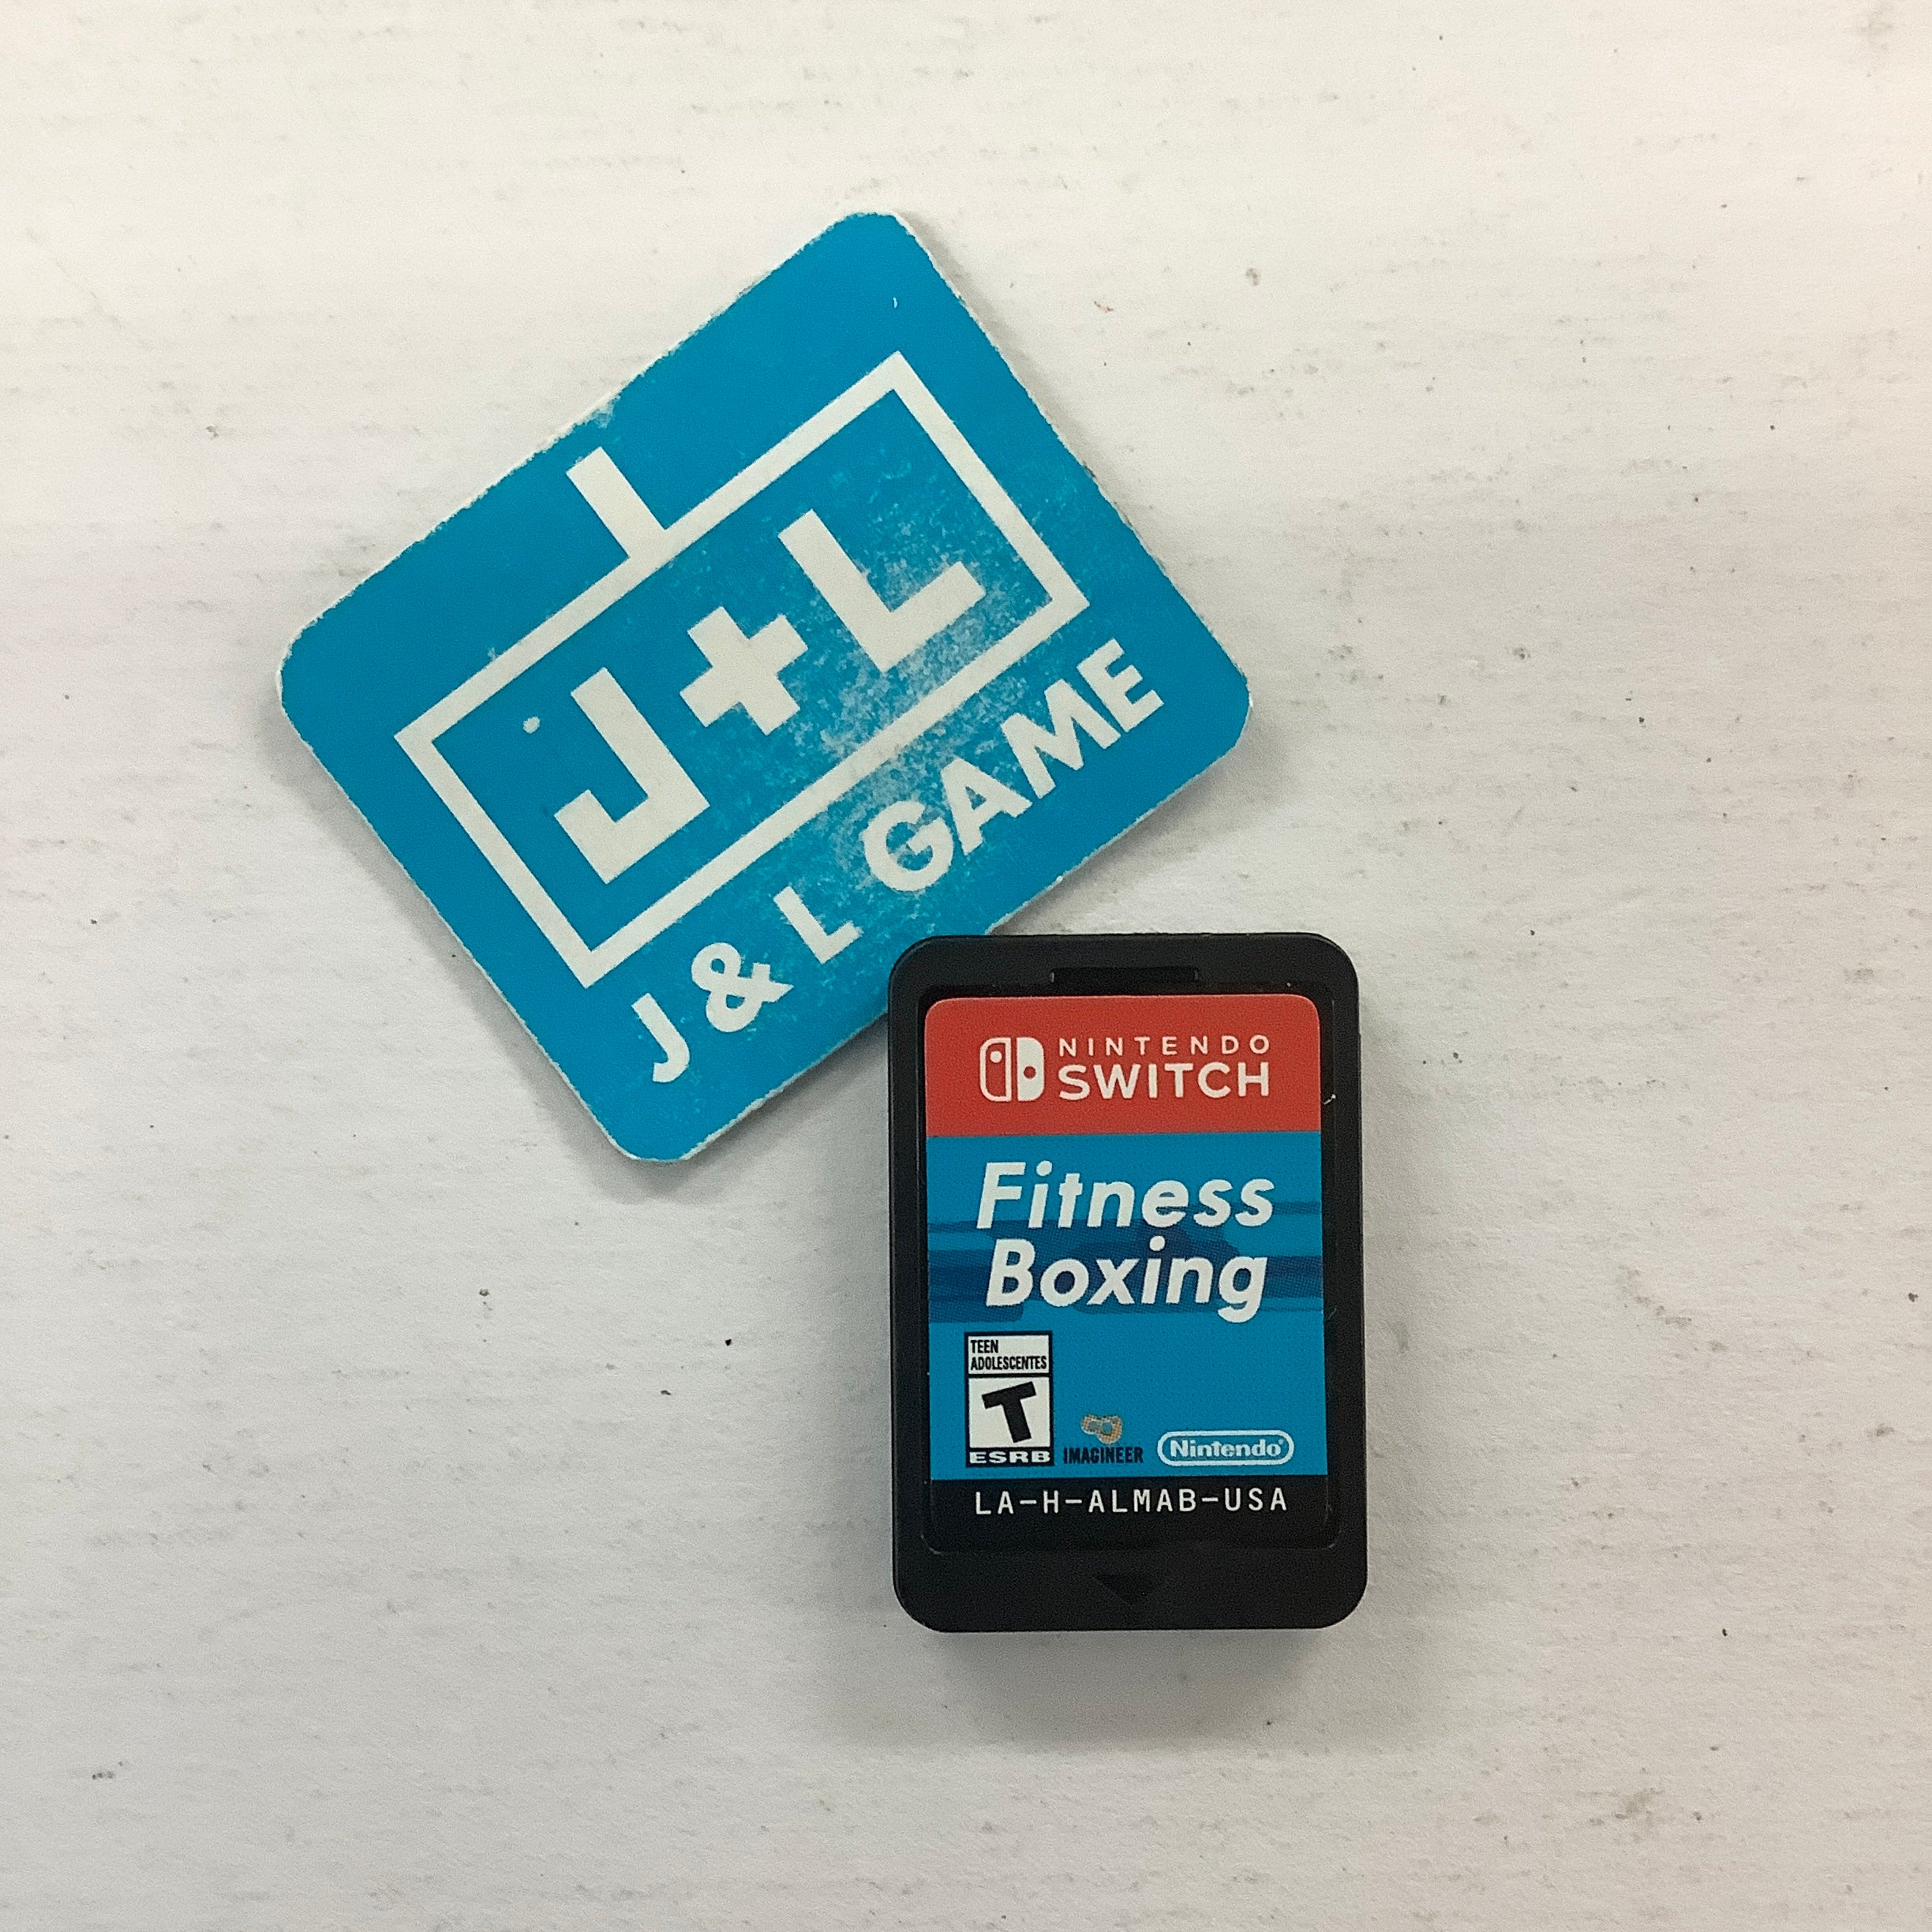 Fitness Boxing - (NSW) Nintendo Switch [Pre-Owned] Video Games Imagineer Co. Ltd.   